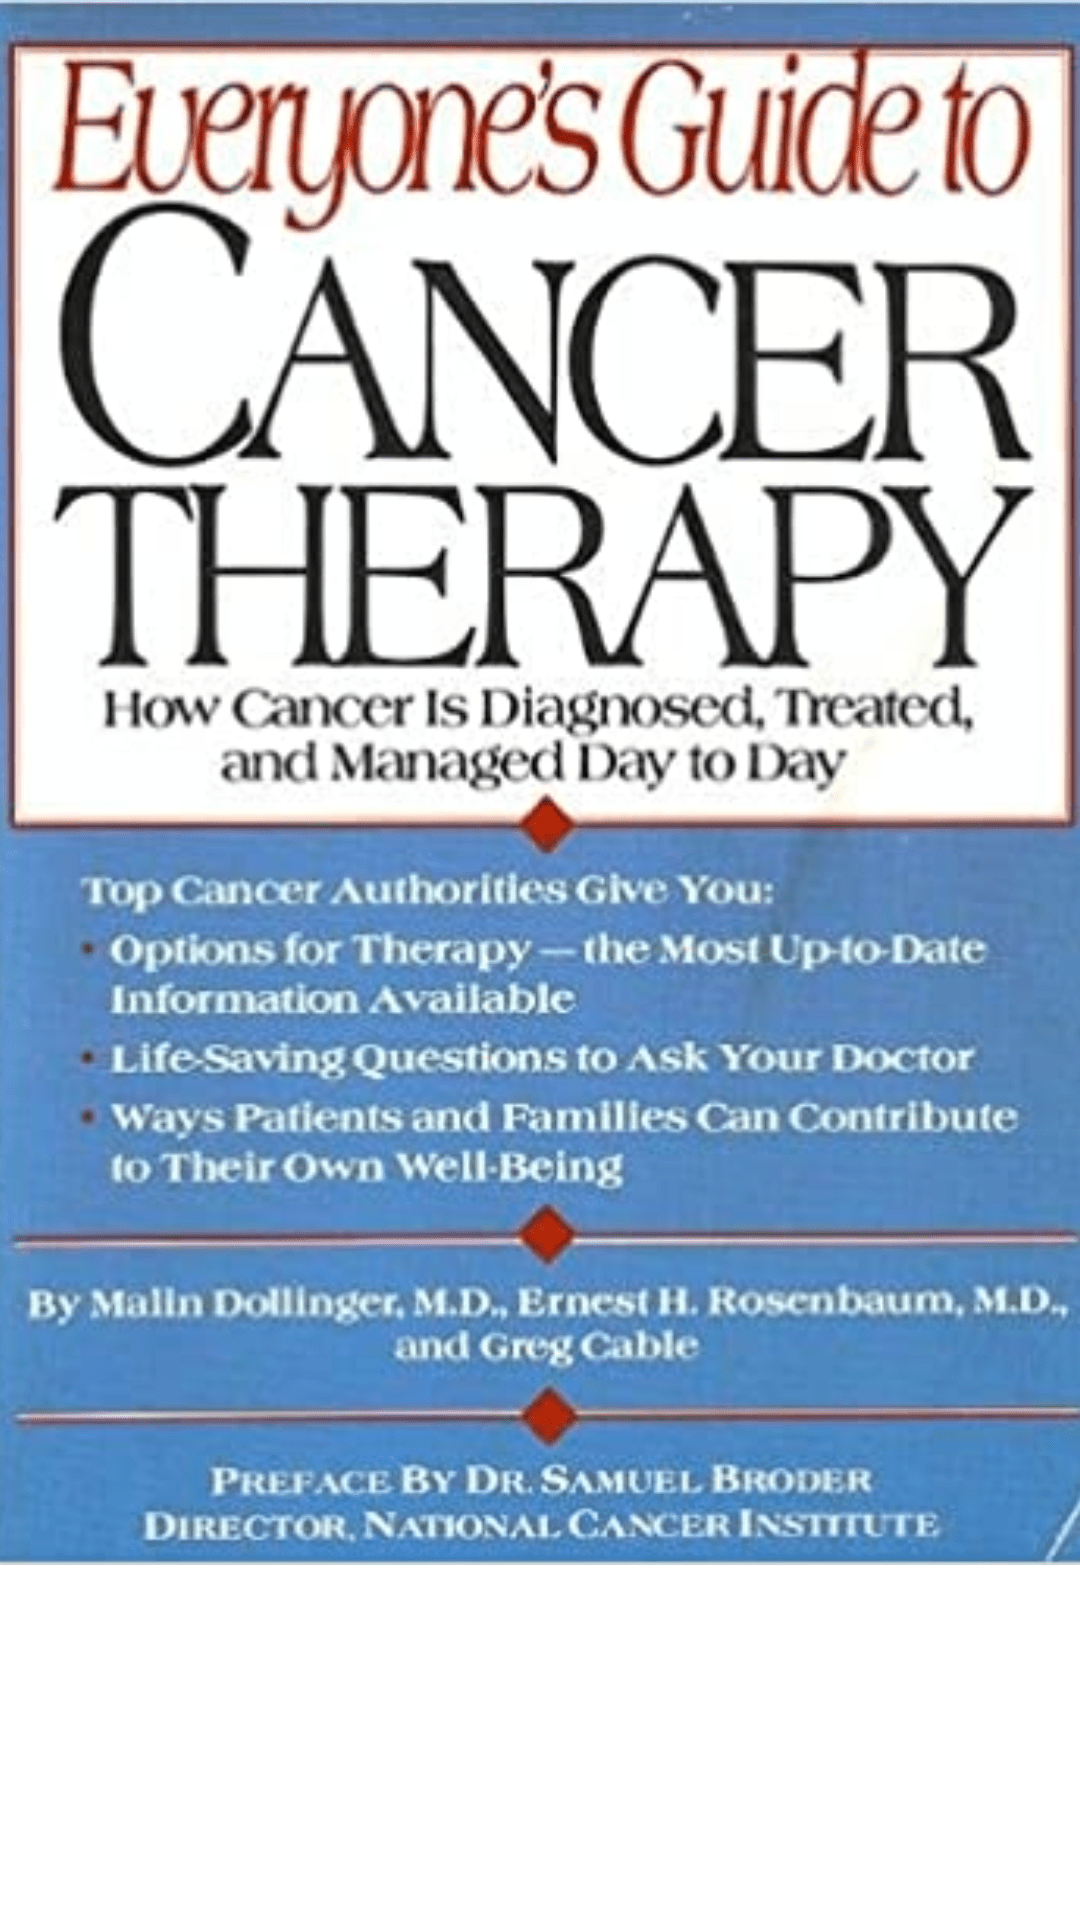 Everyone's Guide to Cancer Therapy